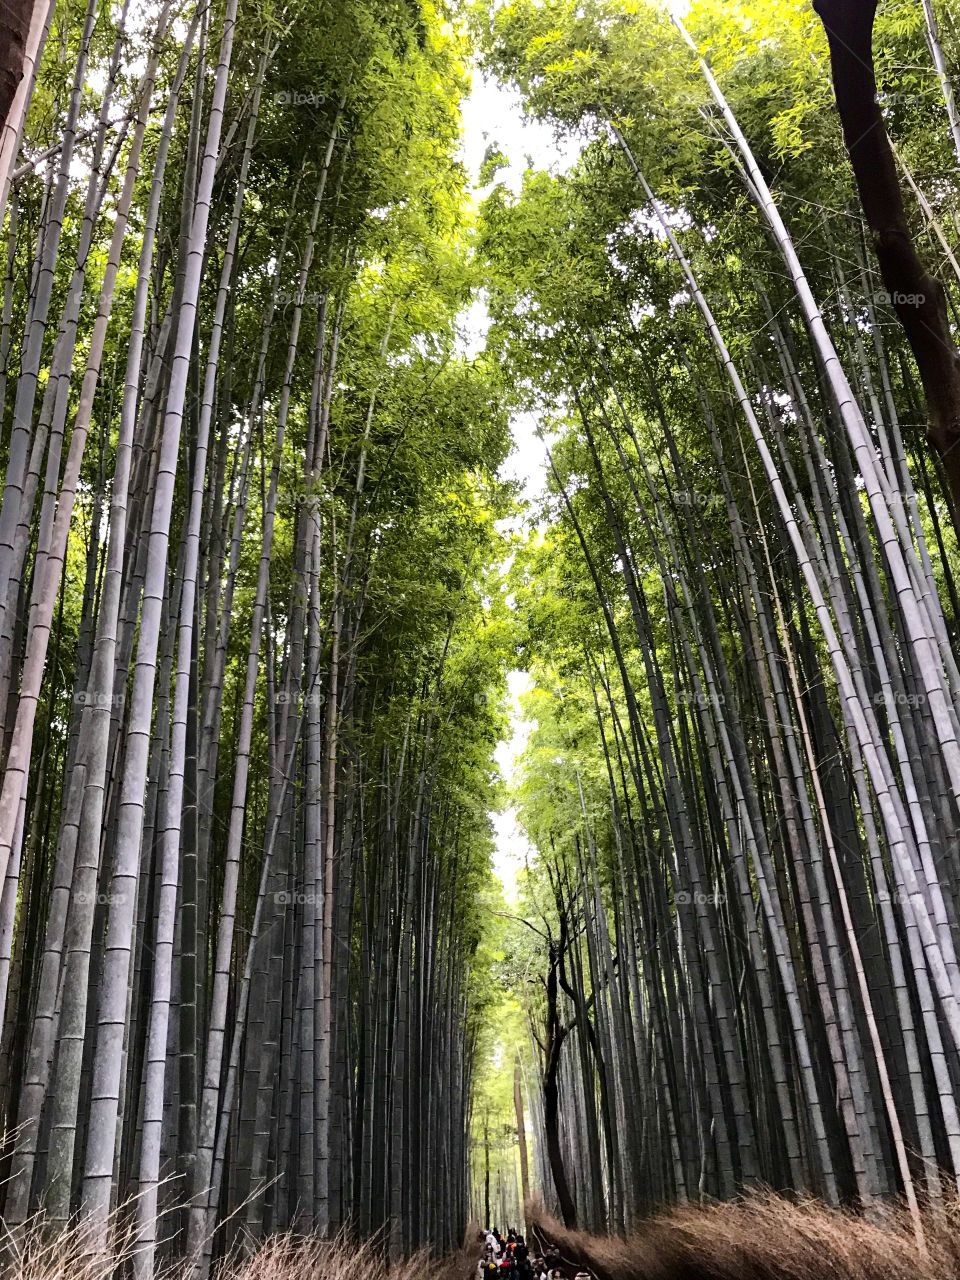 Growing tall on the edges of Kyoto in Japan, the Sagano Bamboo Forest is a once tranquil nature spot.The meditative natural noise is so lovely and it makes it a great place to escape the everyday routine